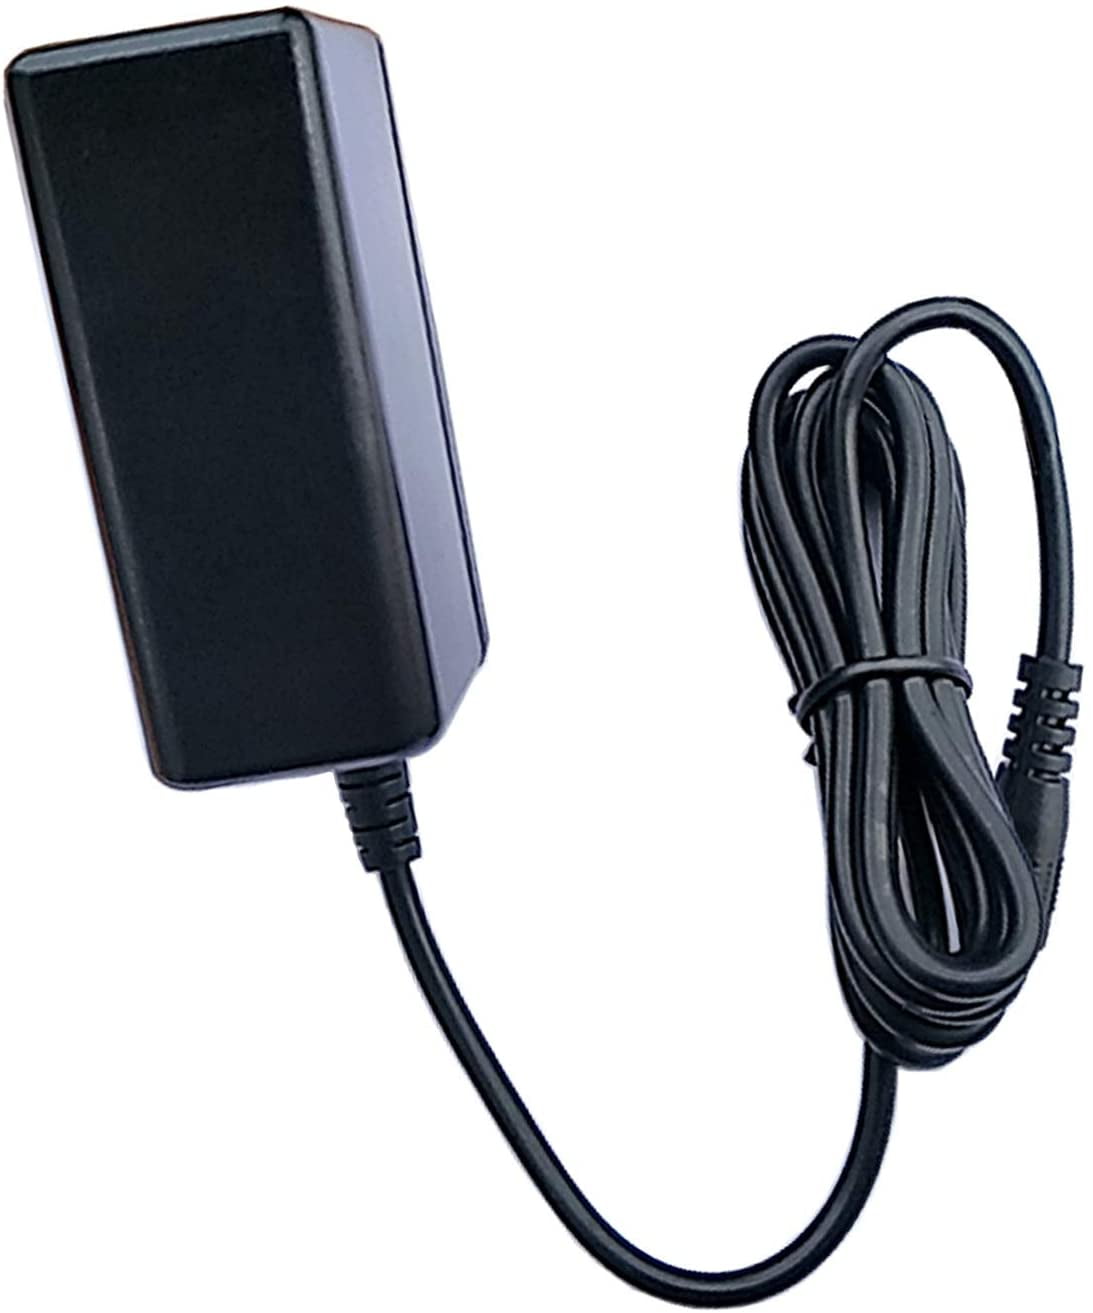 AC/DC Power Adapter Replacement for Native Instruments KOMPLETE KONTROL S61 MK2 POWE-tech 